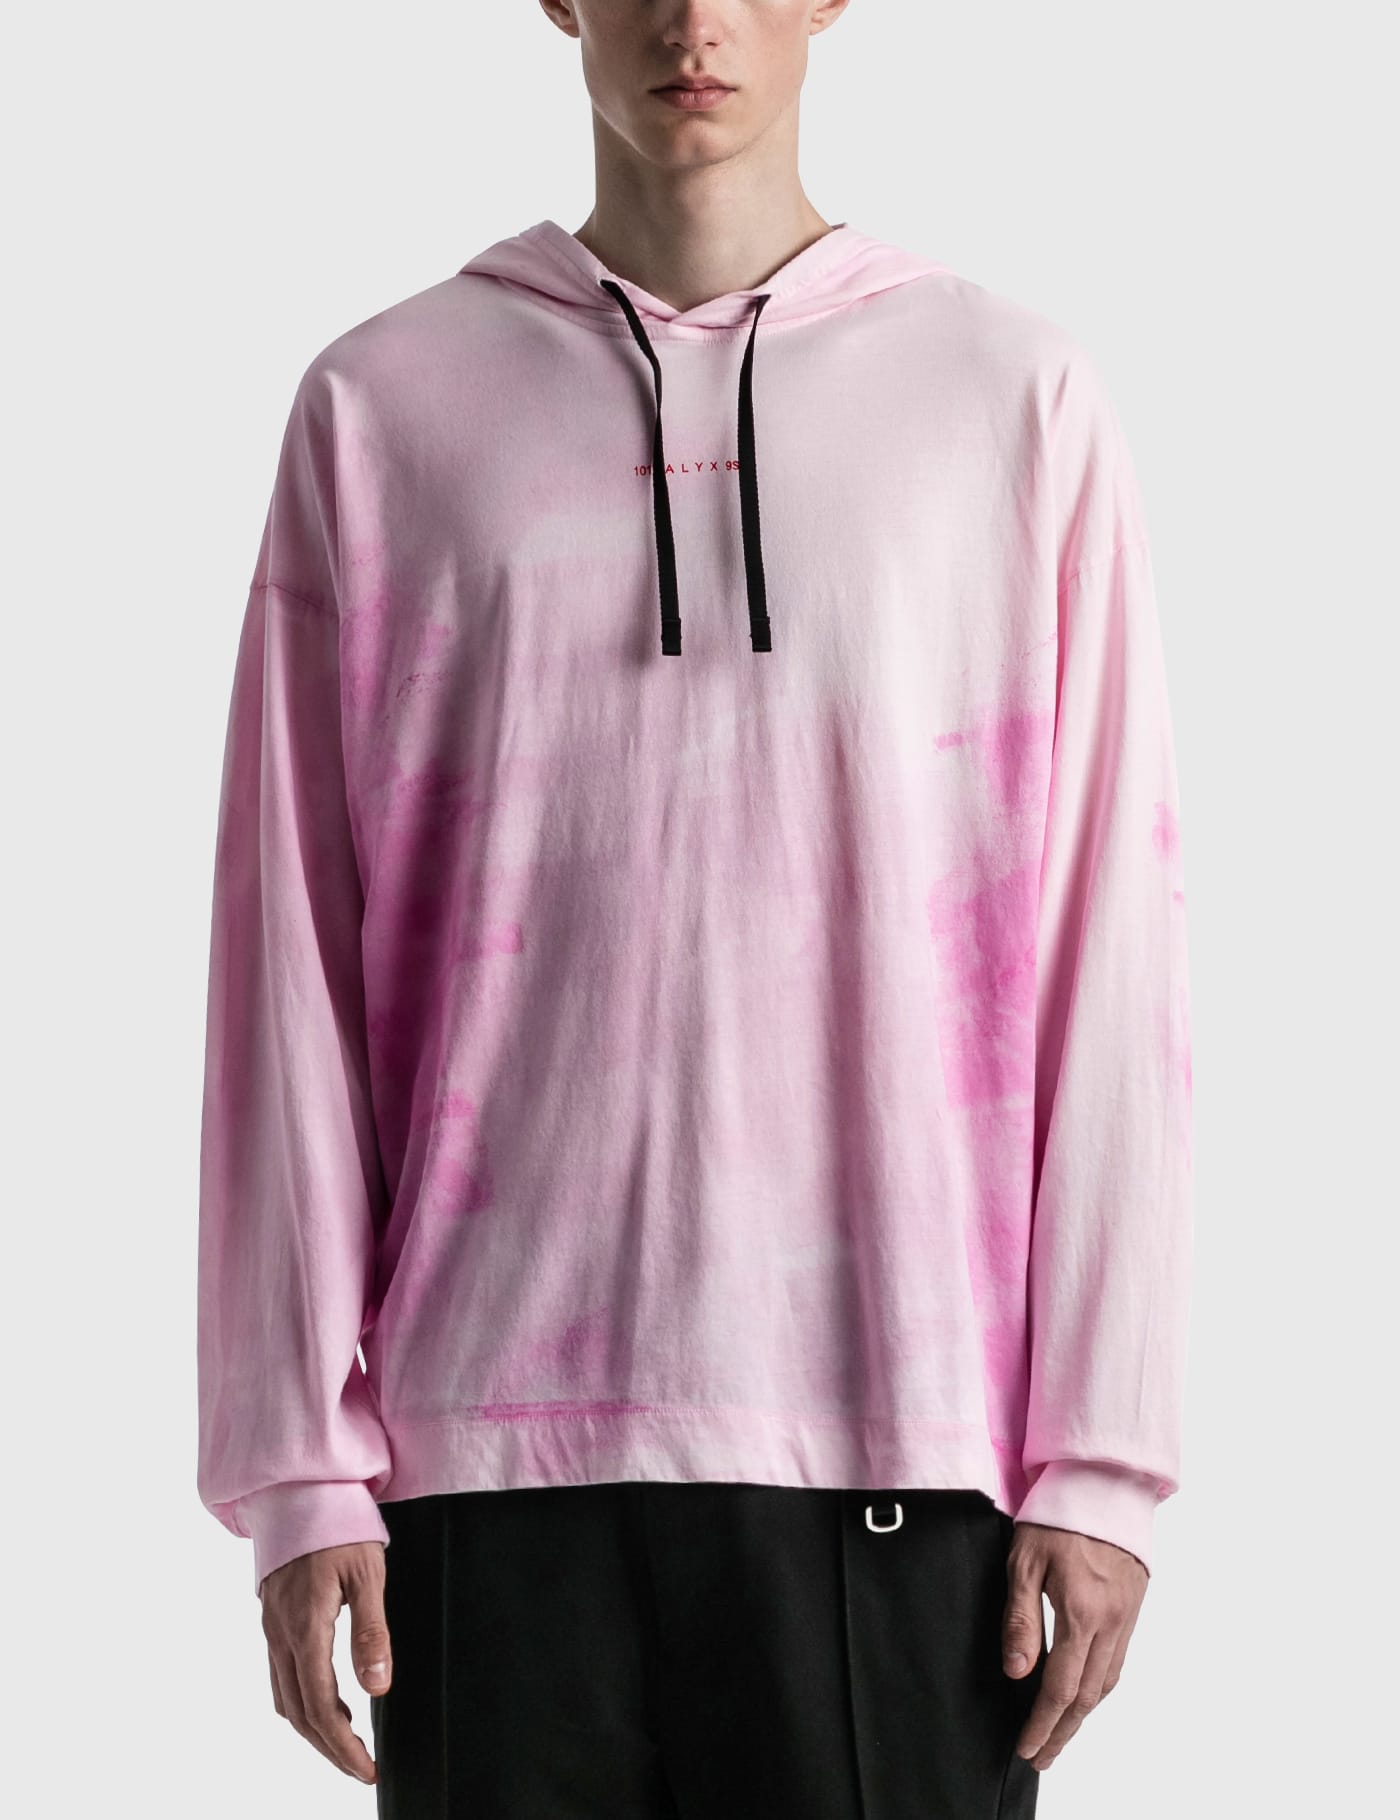 1017 ALYX 9SM - Paint Streak Print Hooded T-shirt | HBX - Globally Curated  Fashion and Lifestyle by Hypebeast